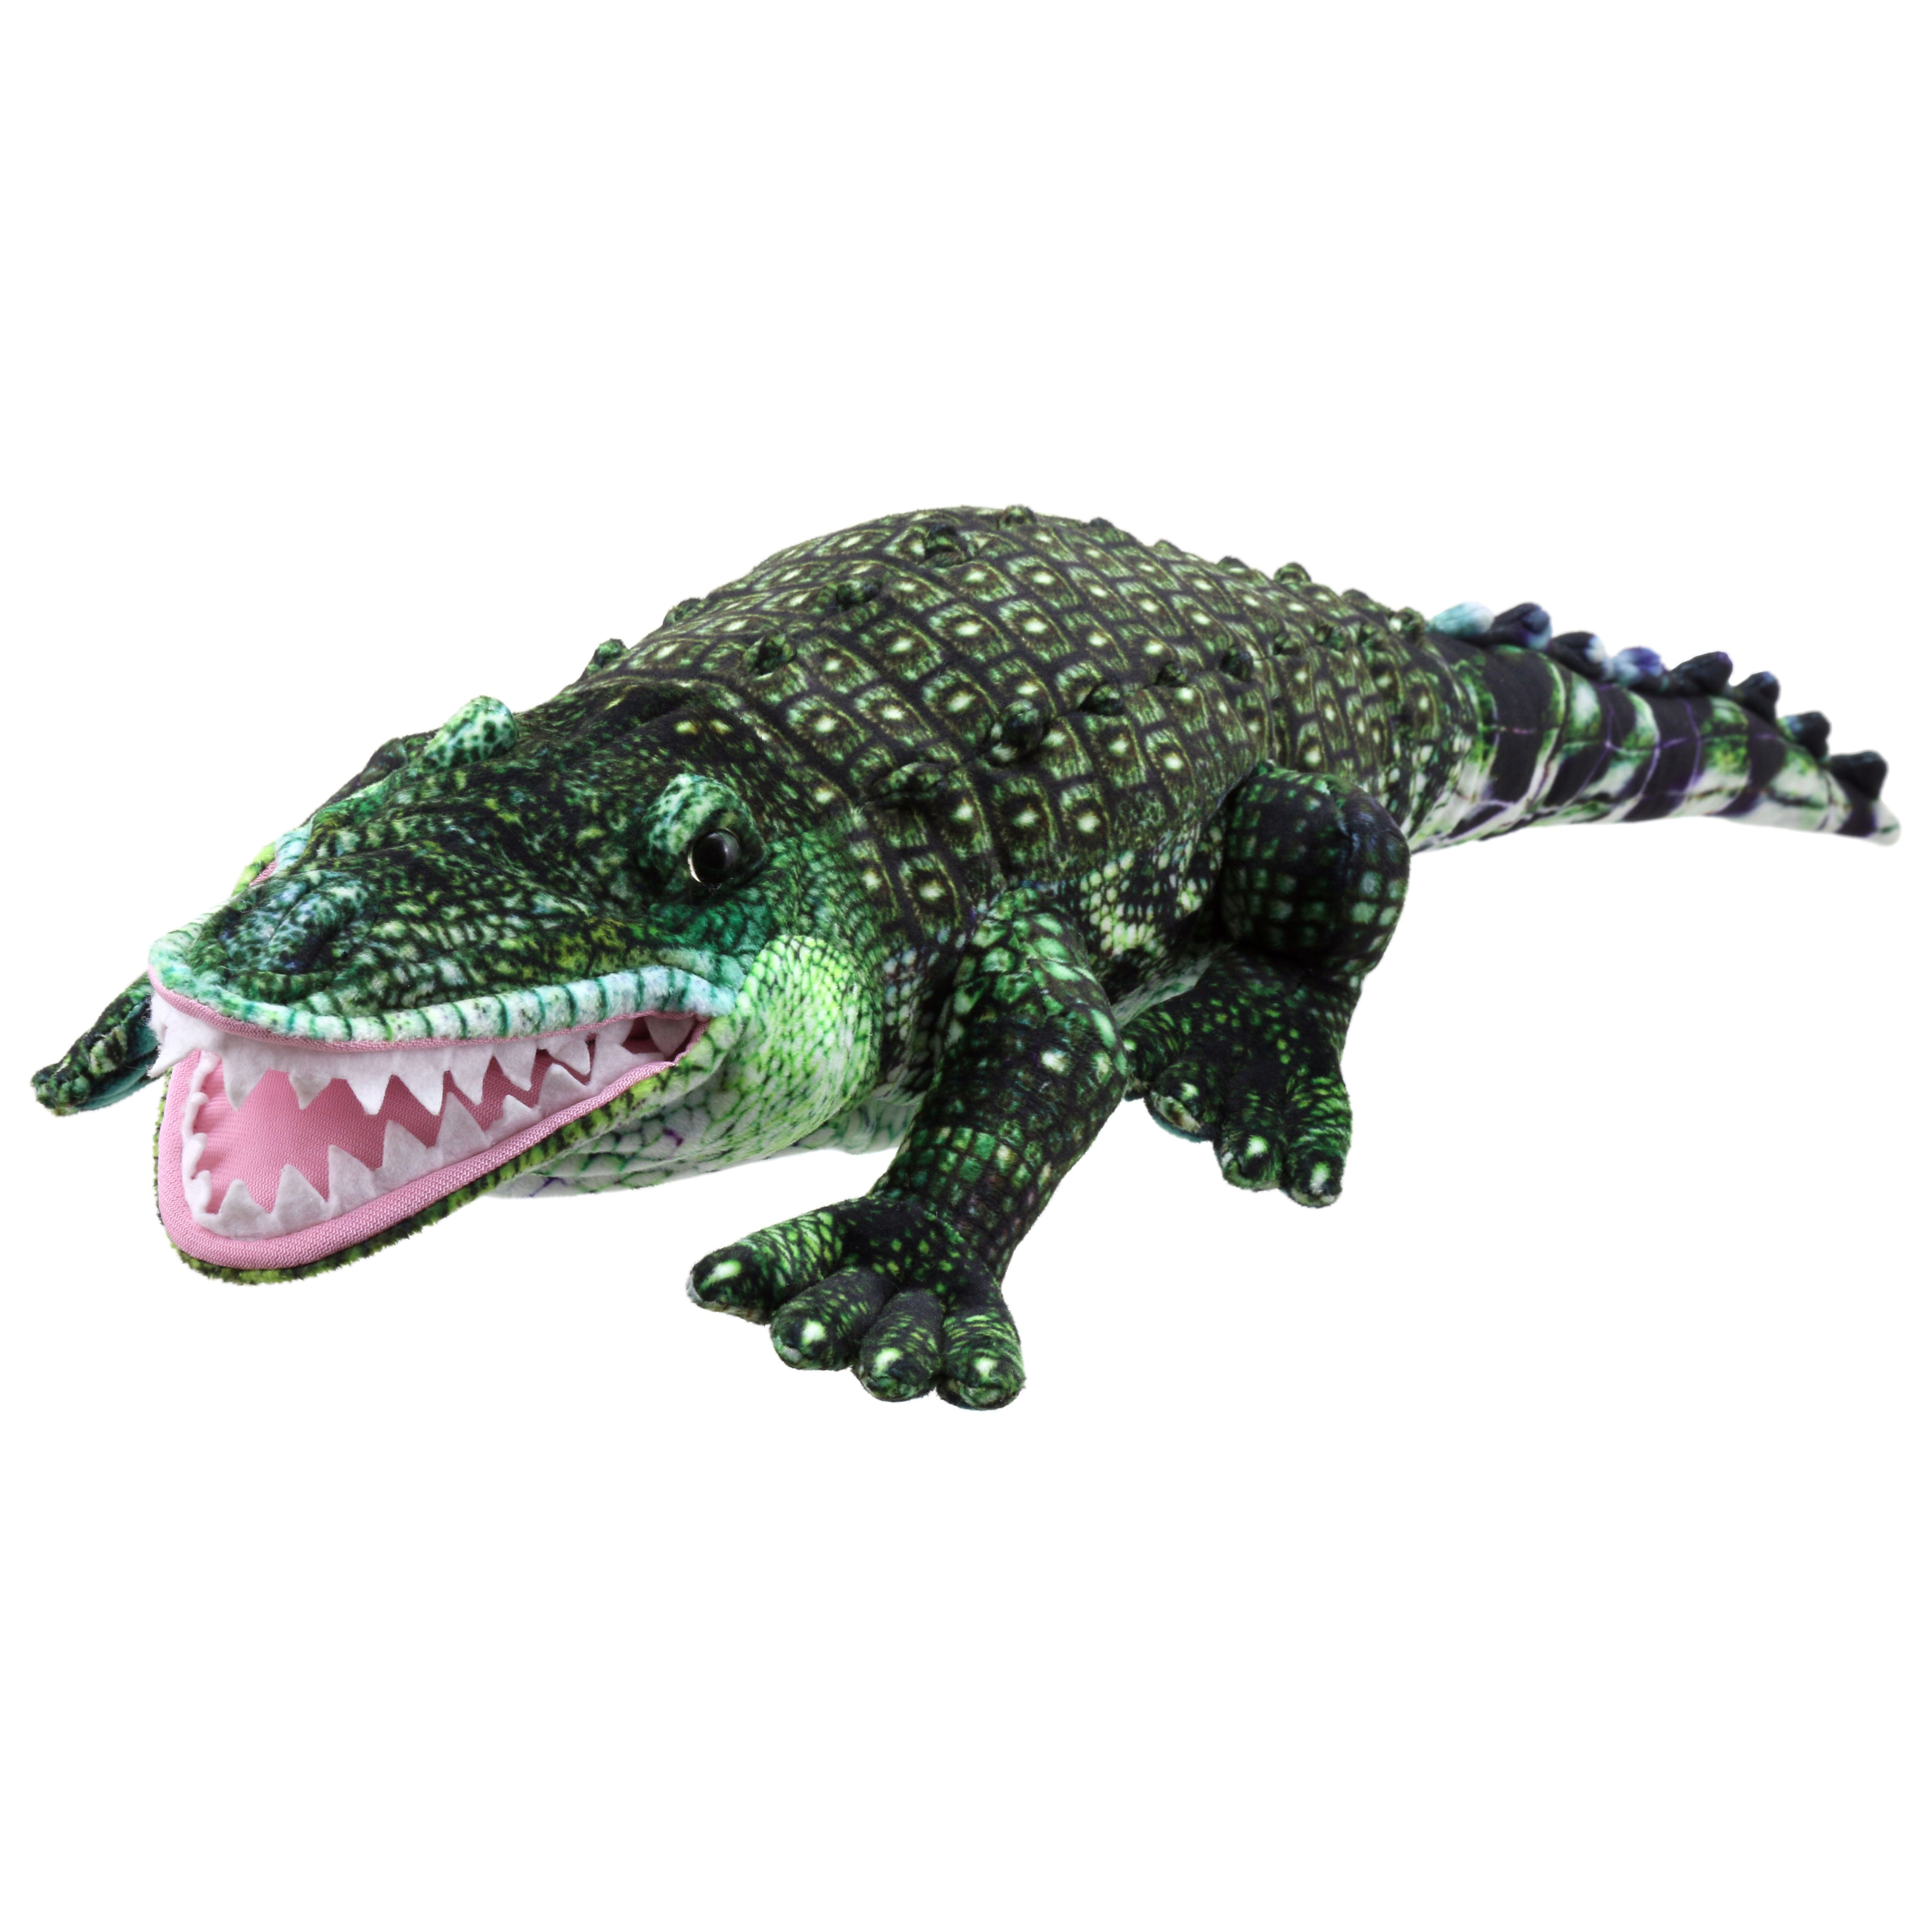 Hand puppet large alligator - Puppet Company